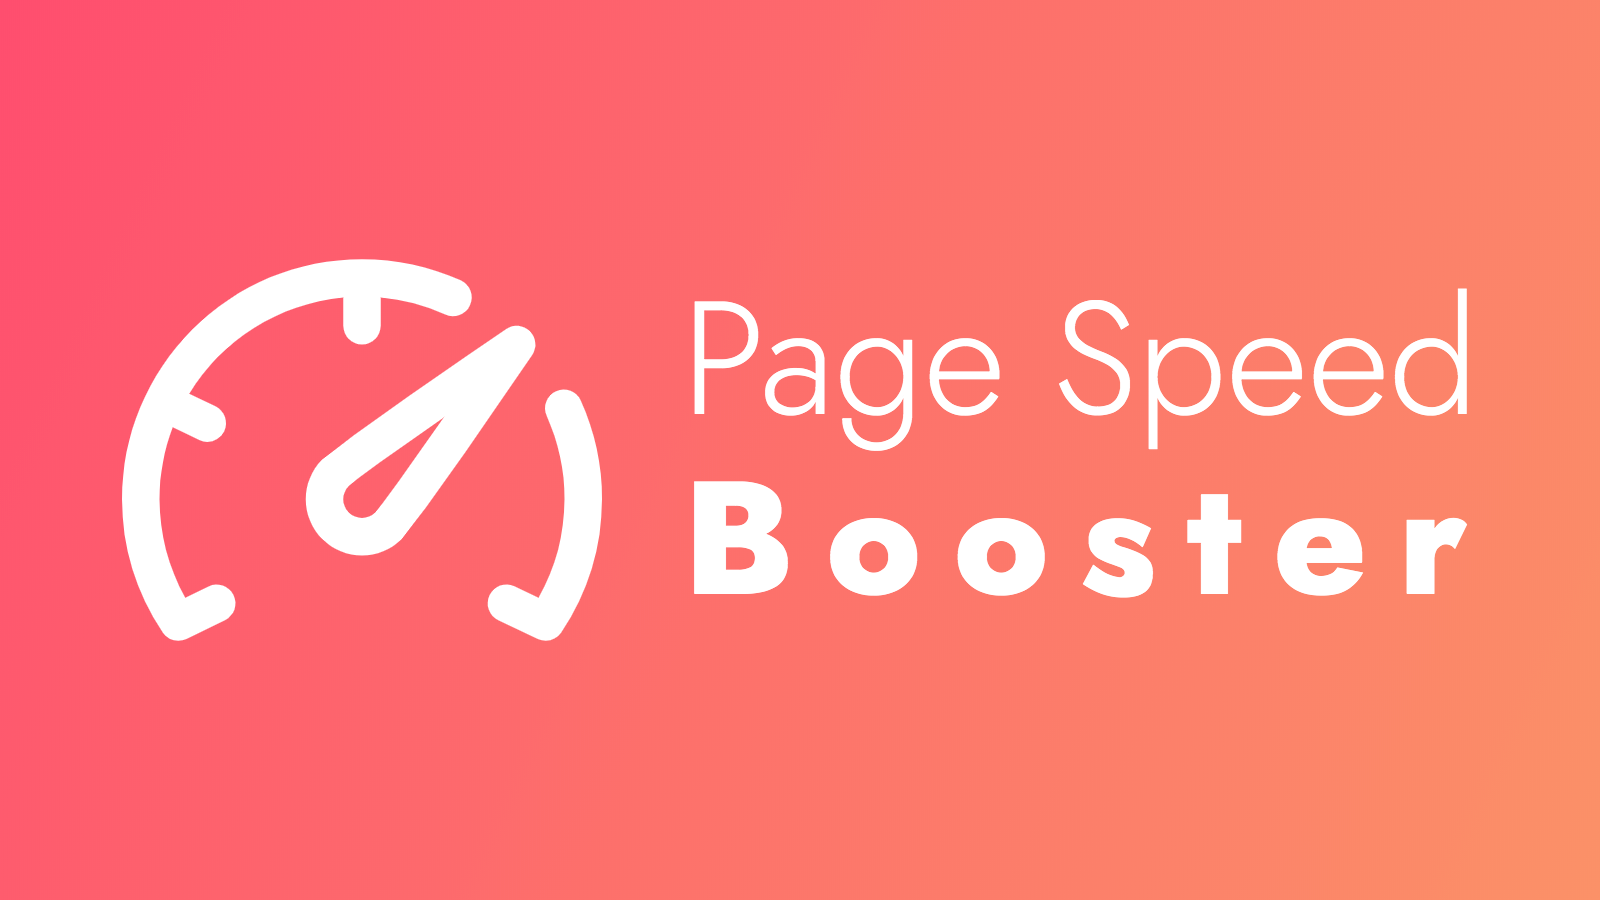 Try this page speed booster for Magento 2